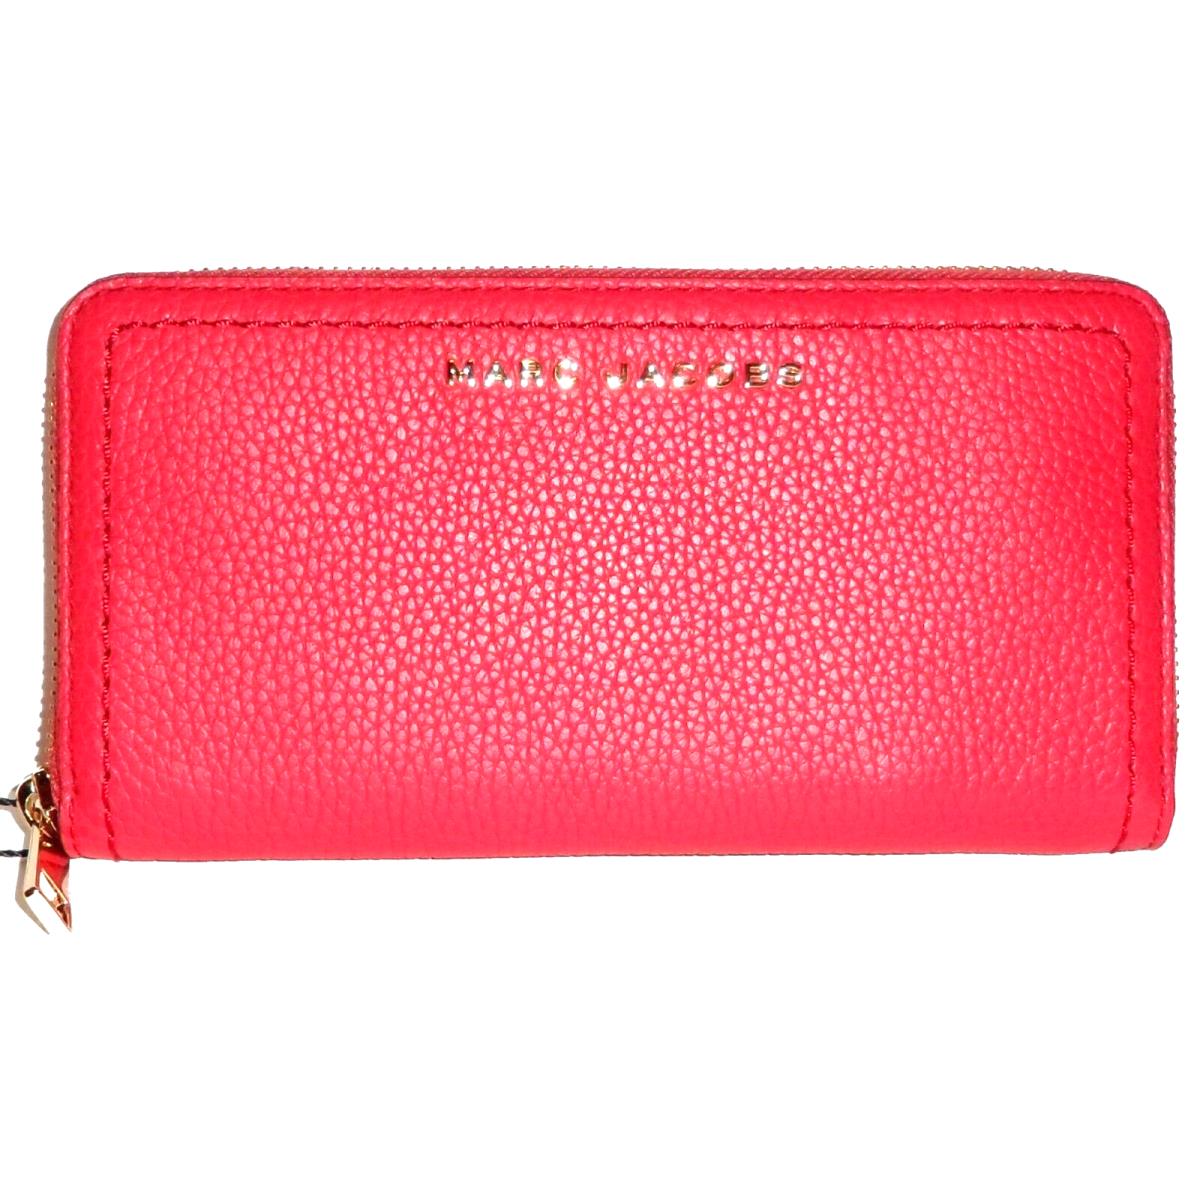 Marc Jacobs Fire Red Leather Zip-around Clutch Wallet